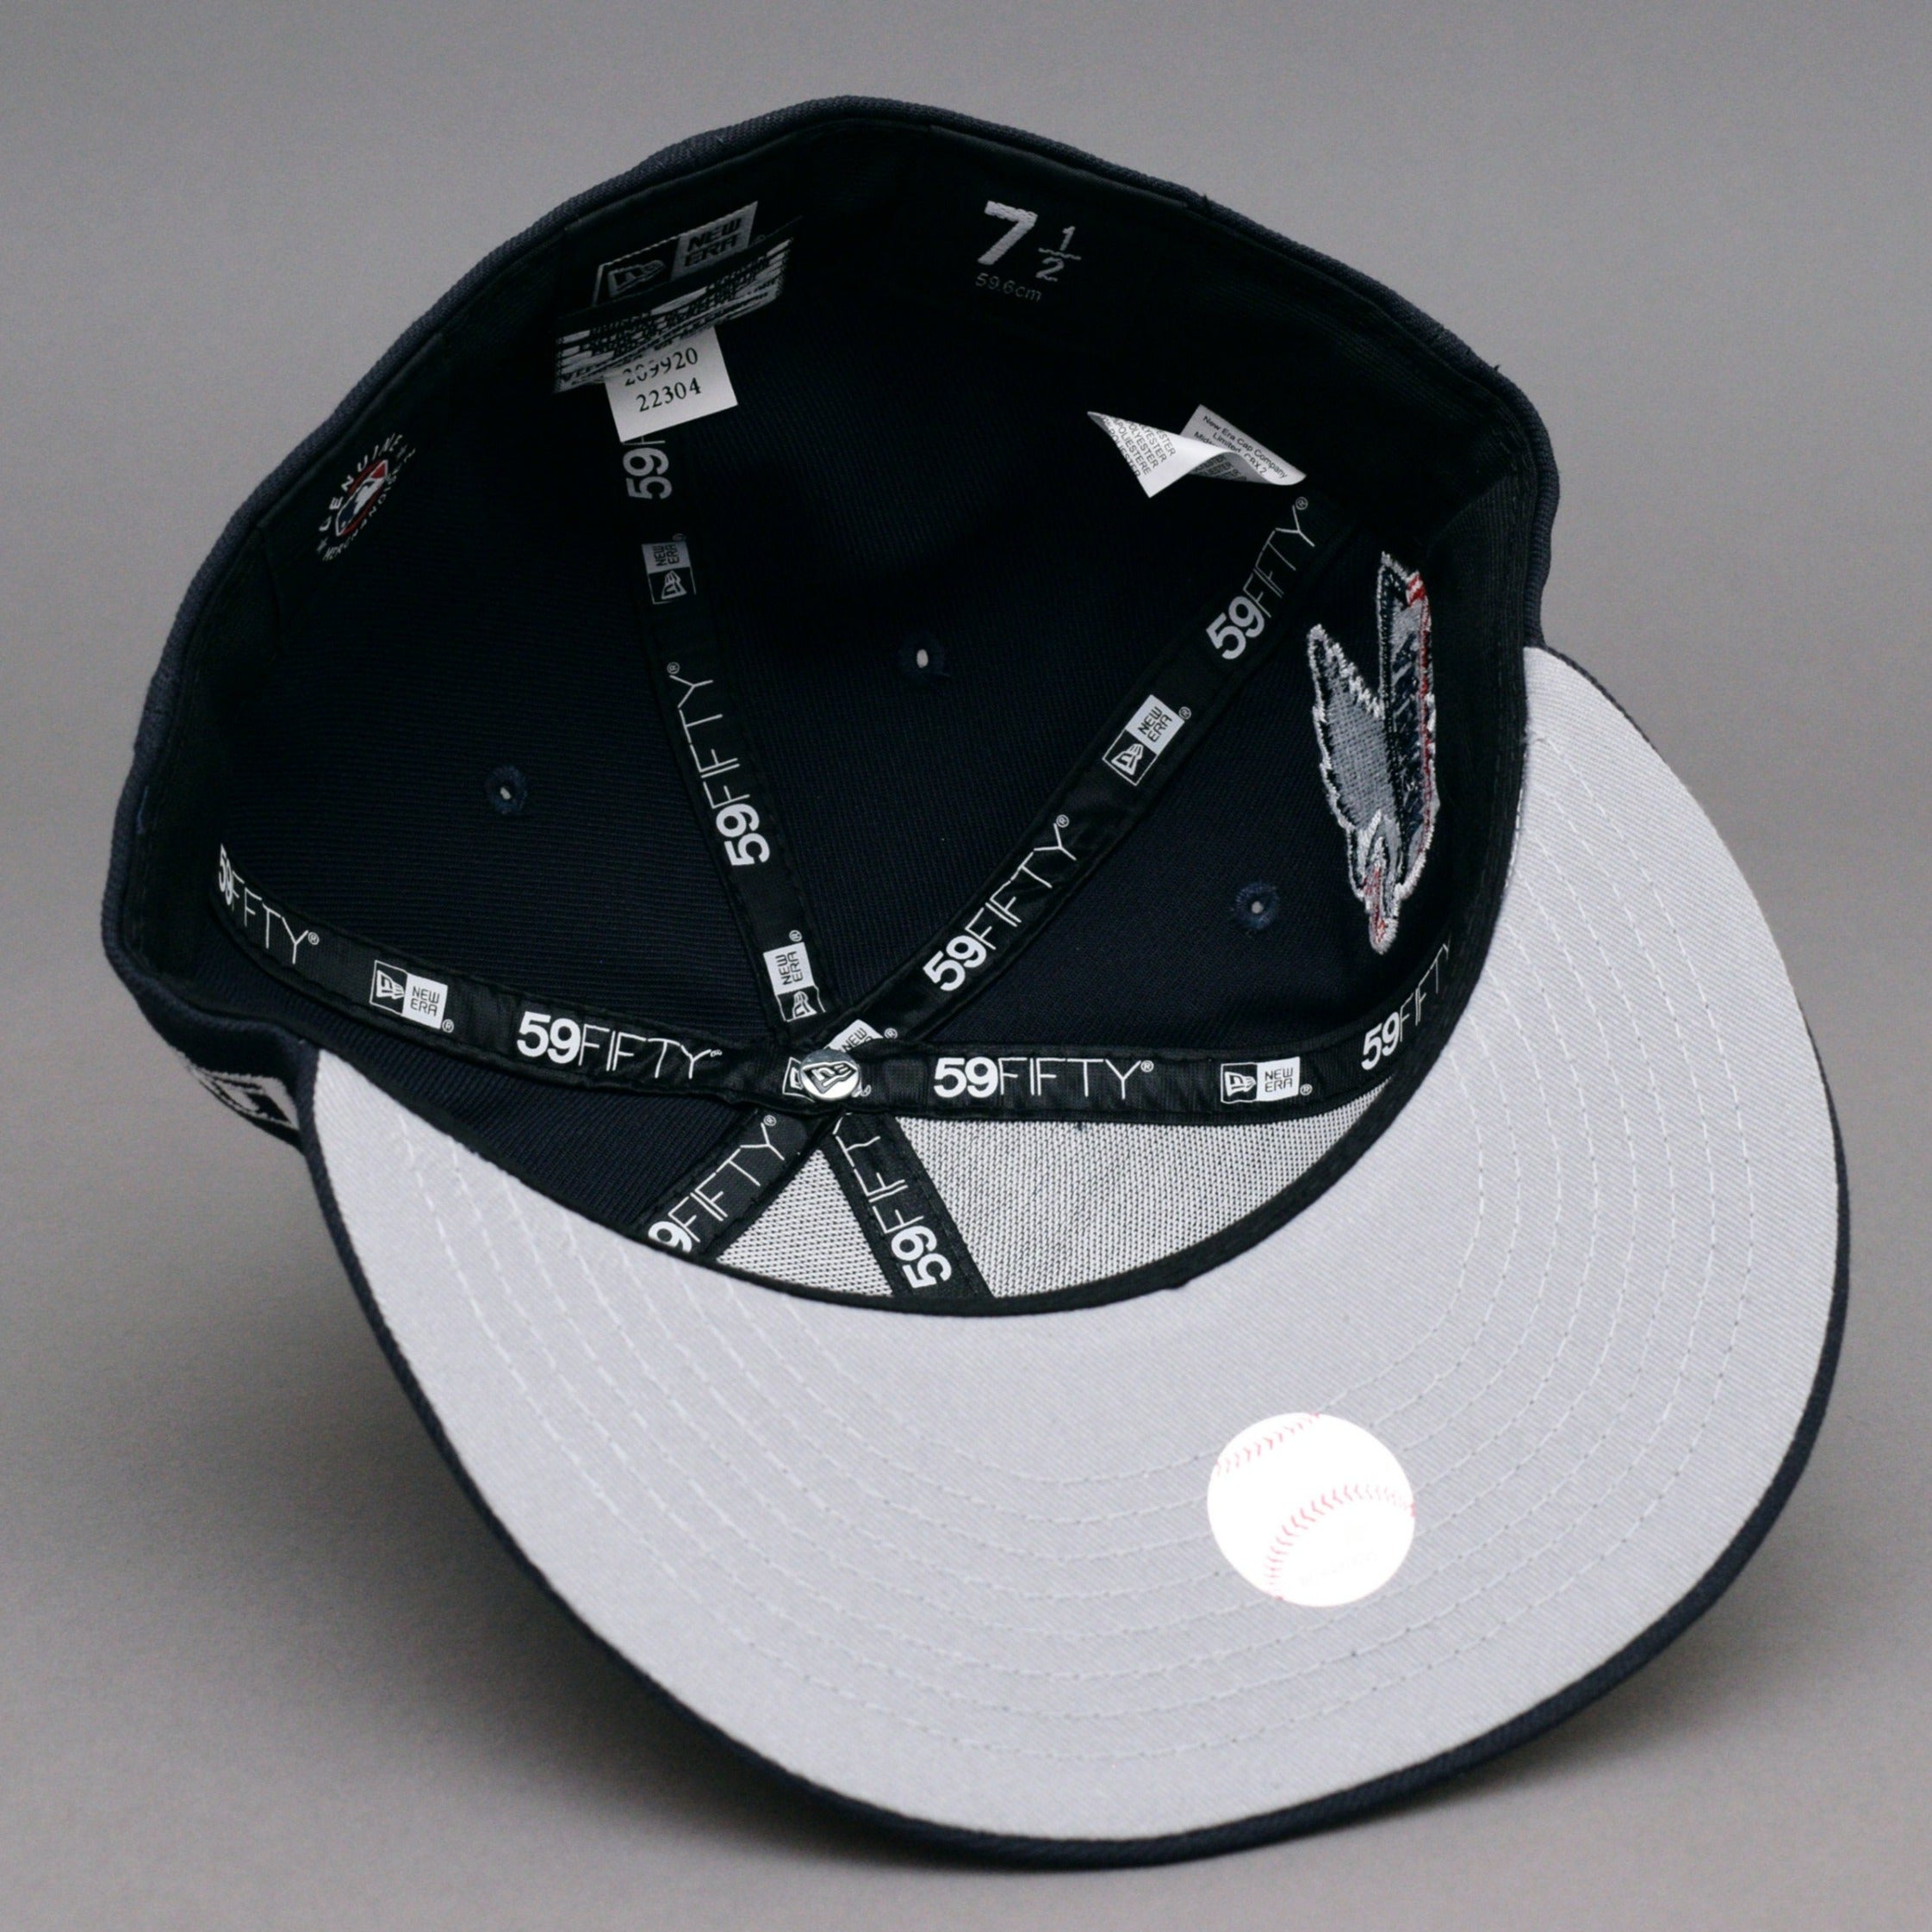 New Era New York NY Yankees 59Fifty Team League Fitted Navy White Blå Hvid 60298714